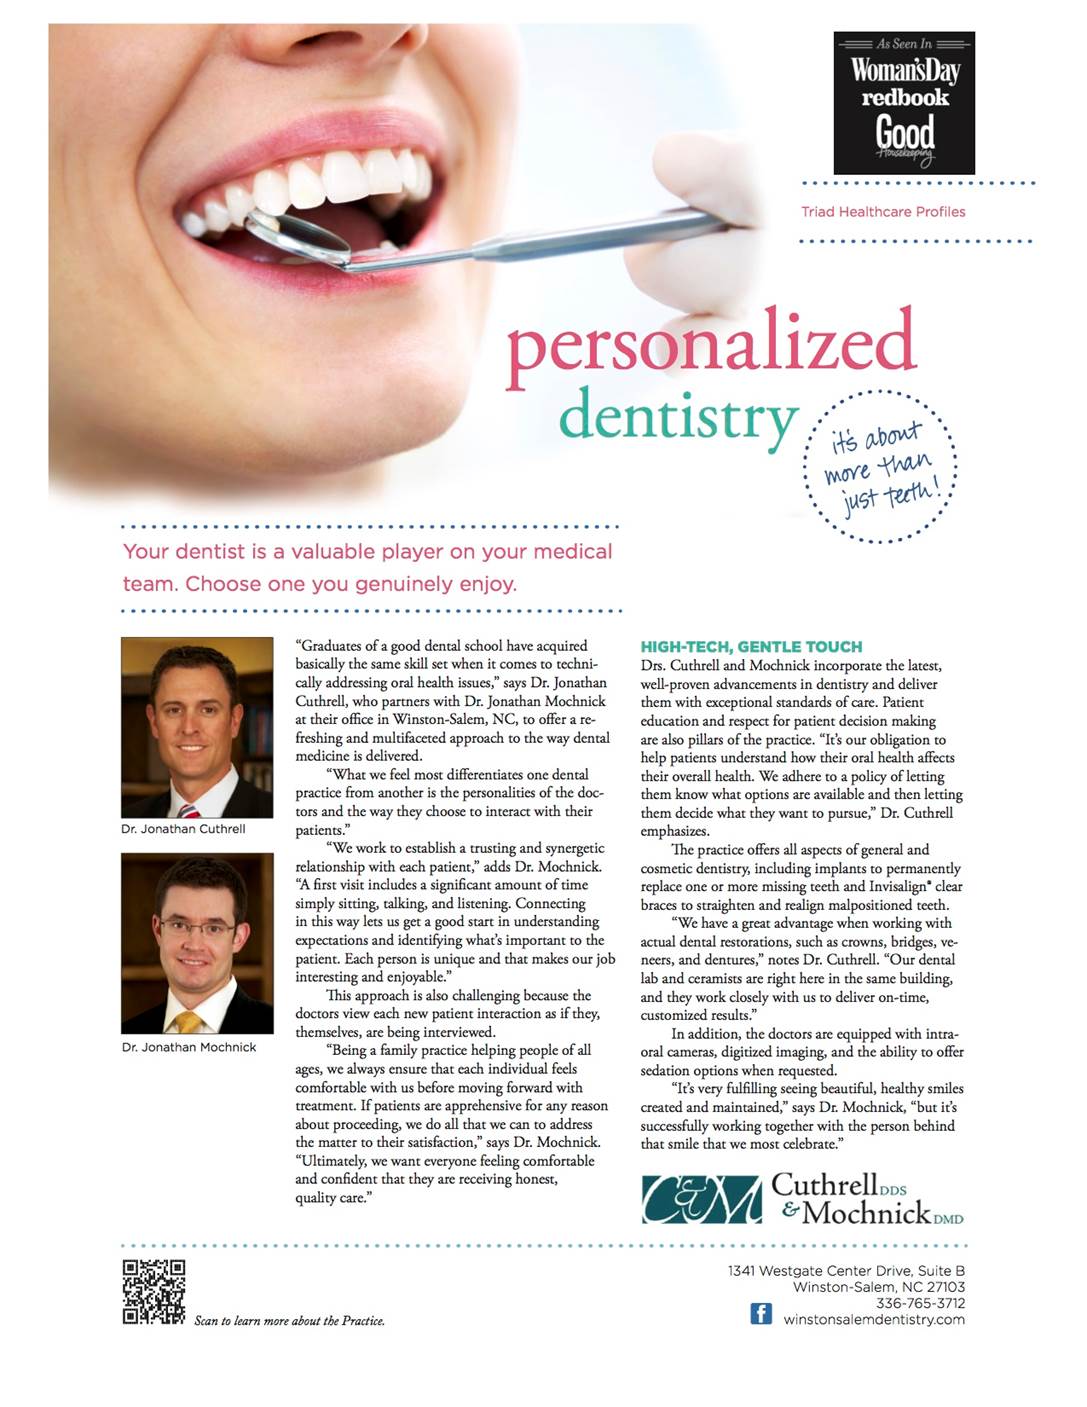 Personalized Dentistry